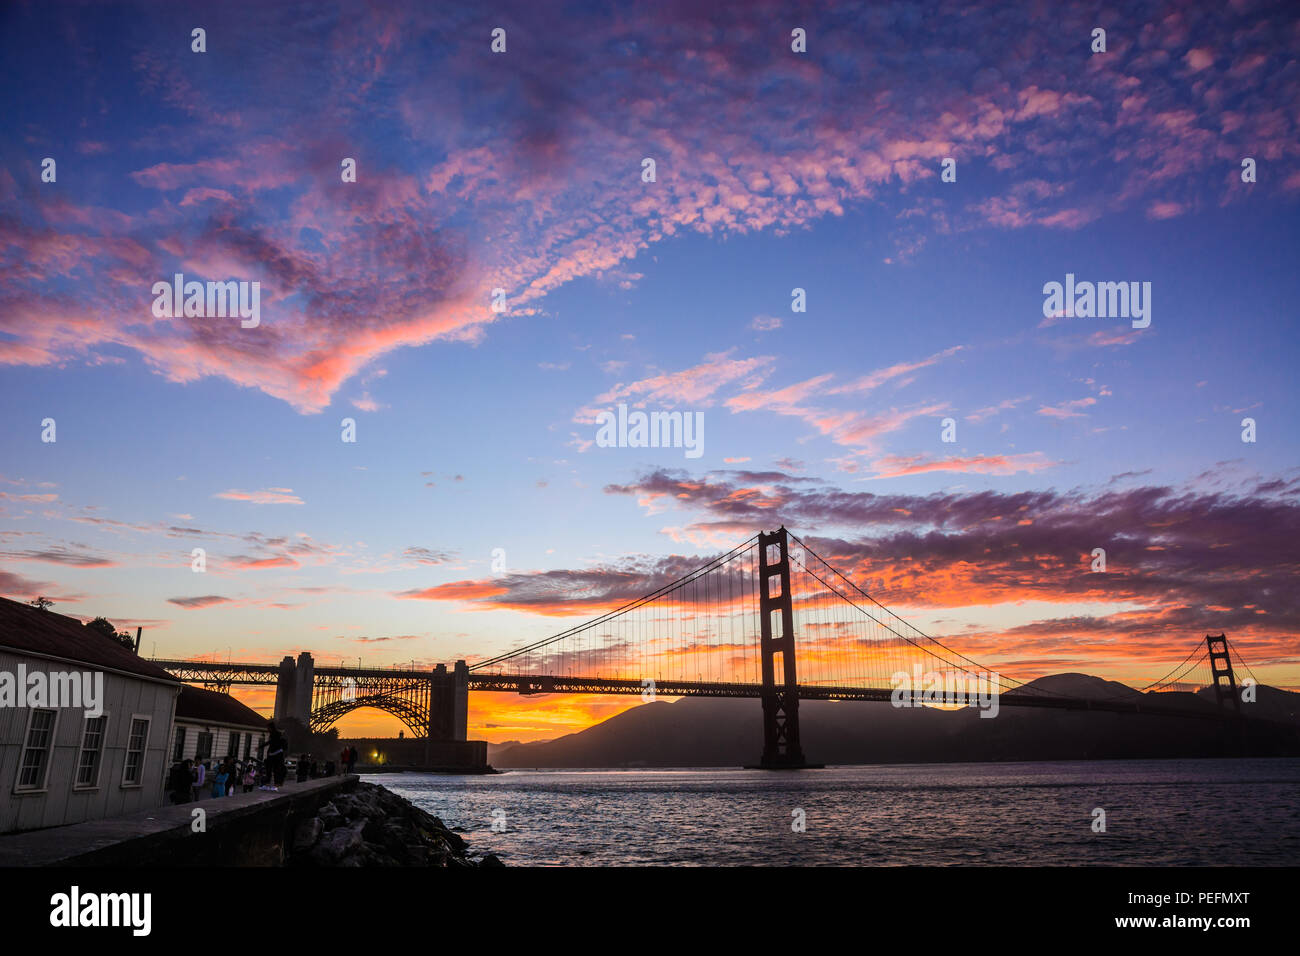 A beautiful sunset over San Francisco's famous Golden Gate Bridge and San Francisco Bay as seen from Crissy Field near Fort Point. Stock Photo